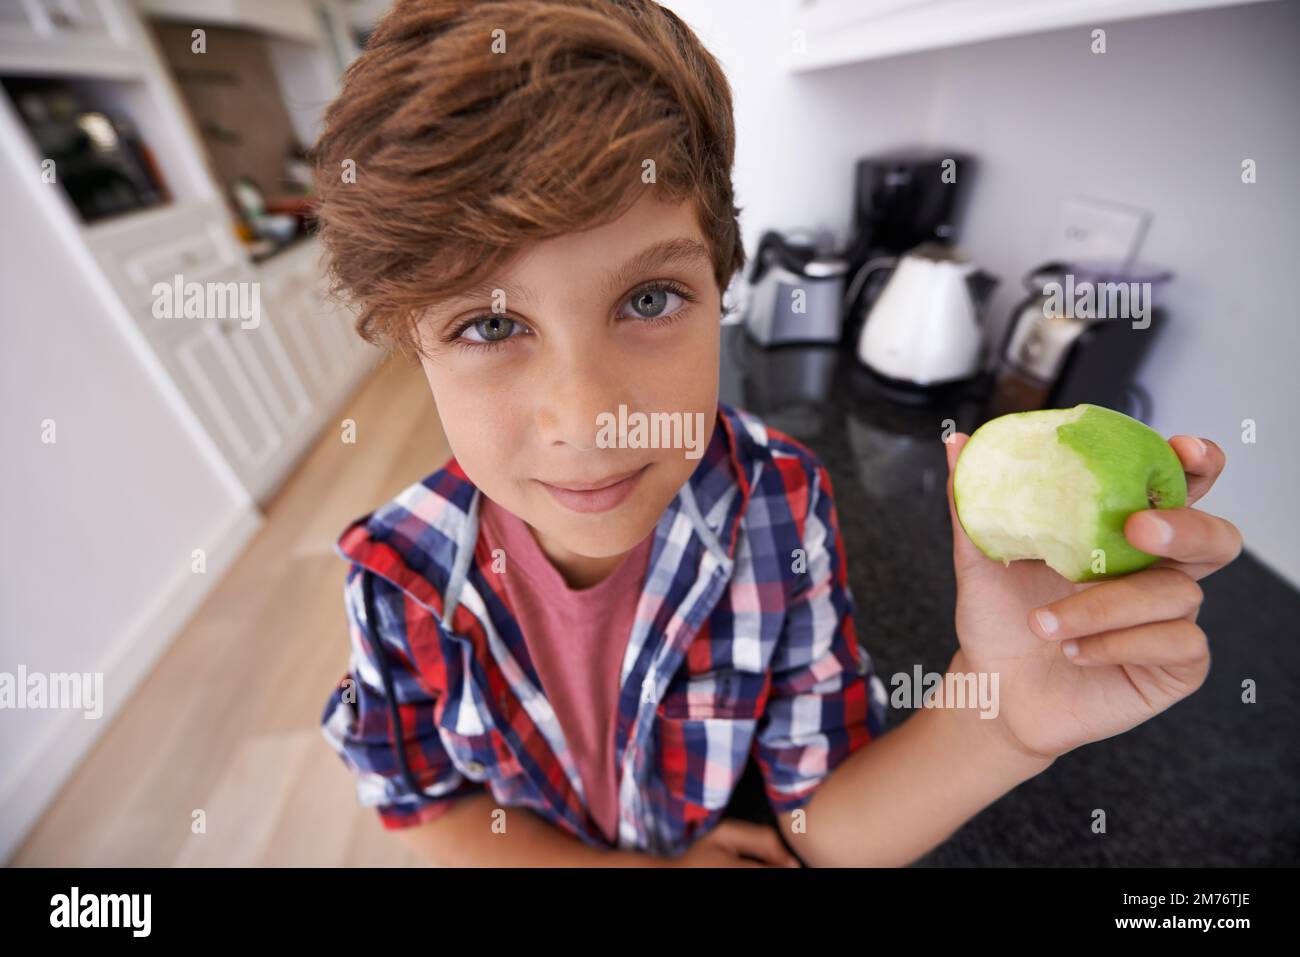 Take it from me, apples are yum. a young boy eating an apple. Stock Photo